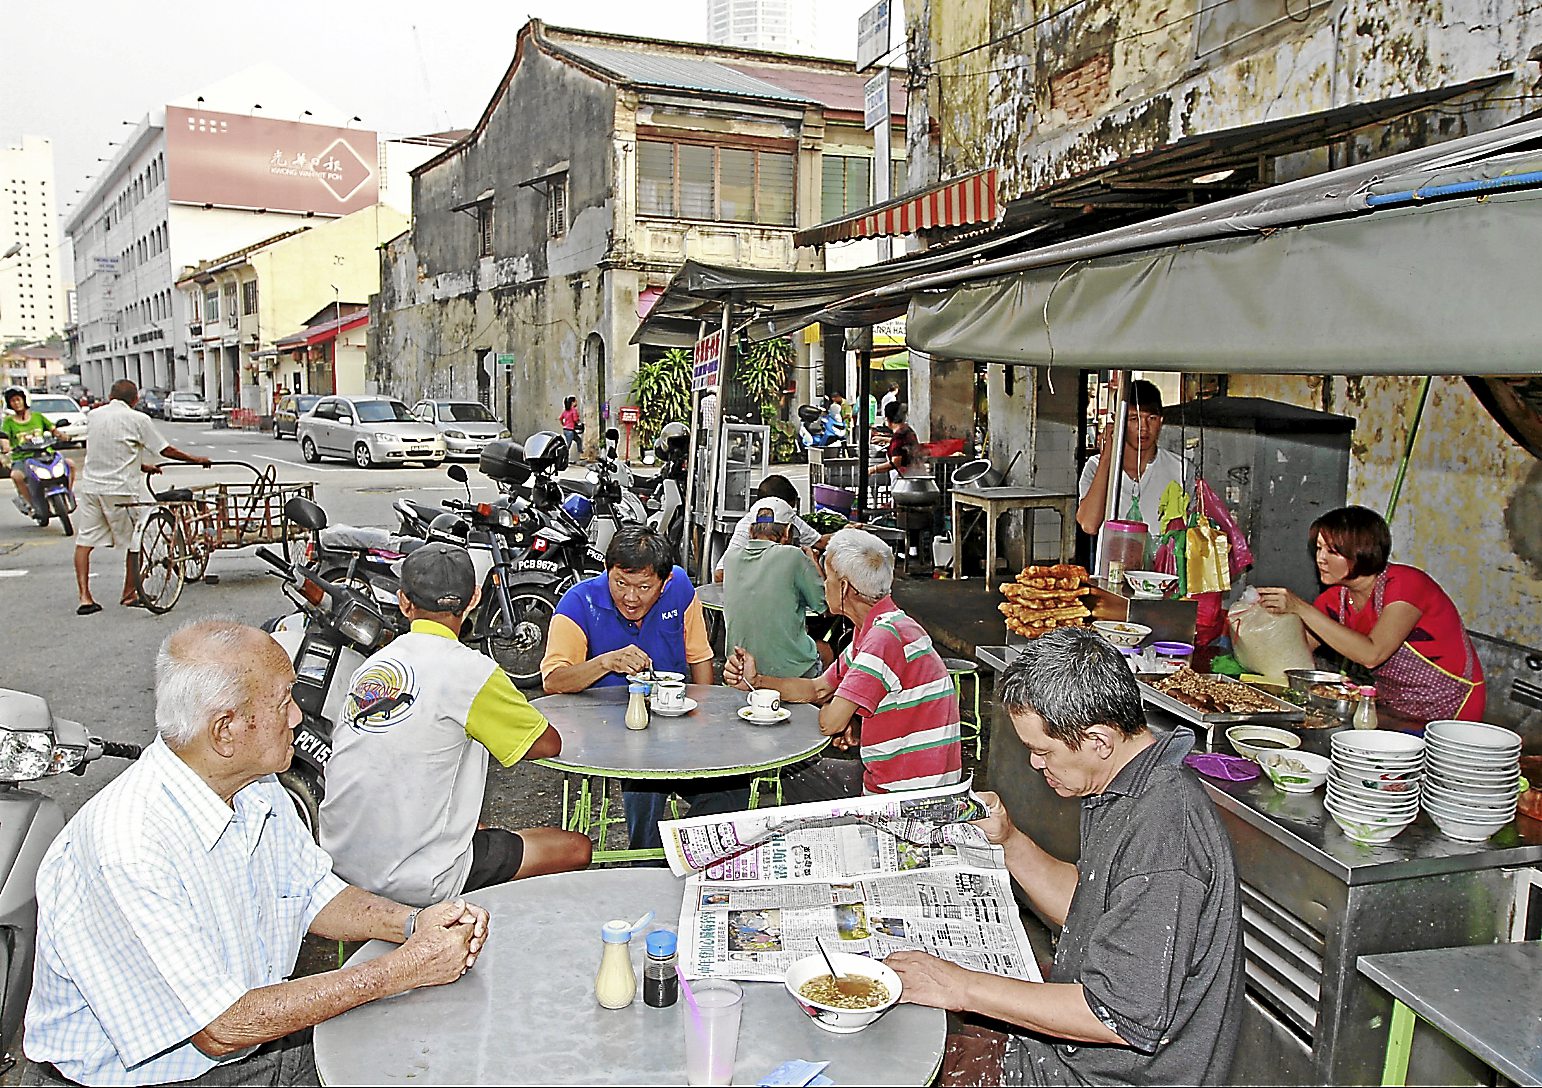 Brief Caption:The Jalan C.Y. Choy in Georgetown.The Star/ Lim Beng Tatt/ 25 July 2013.